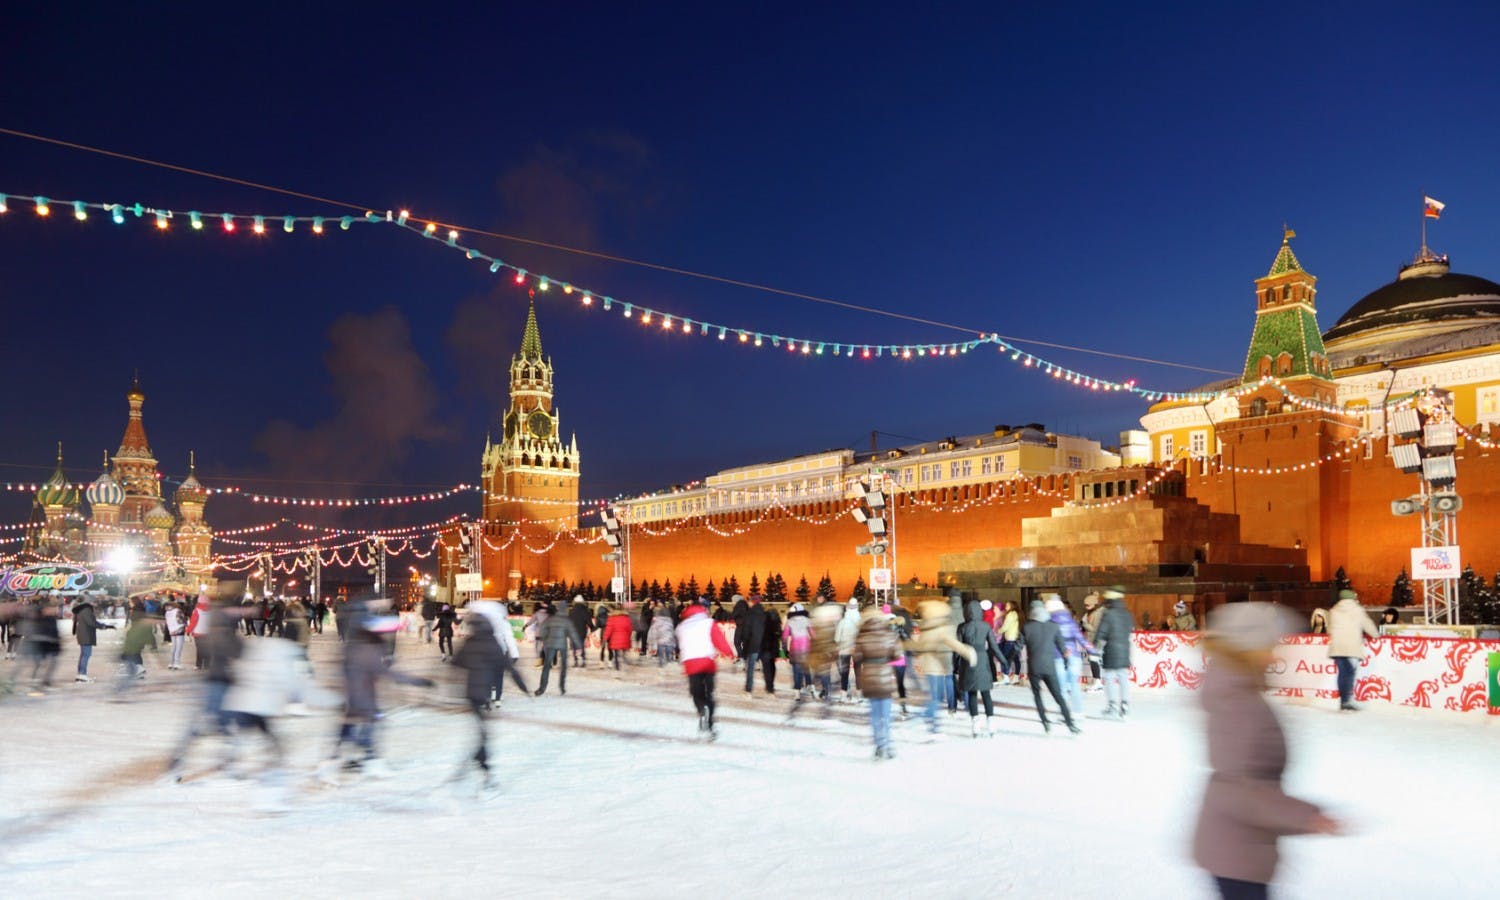 Moscow Red Square ice skating rink